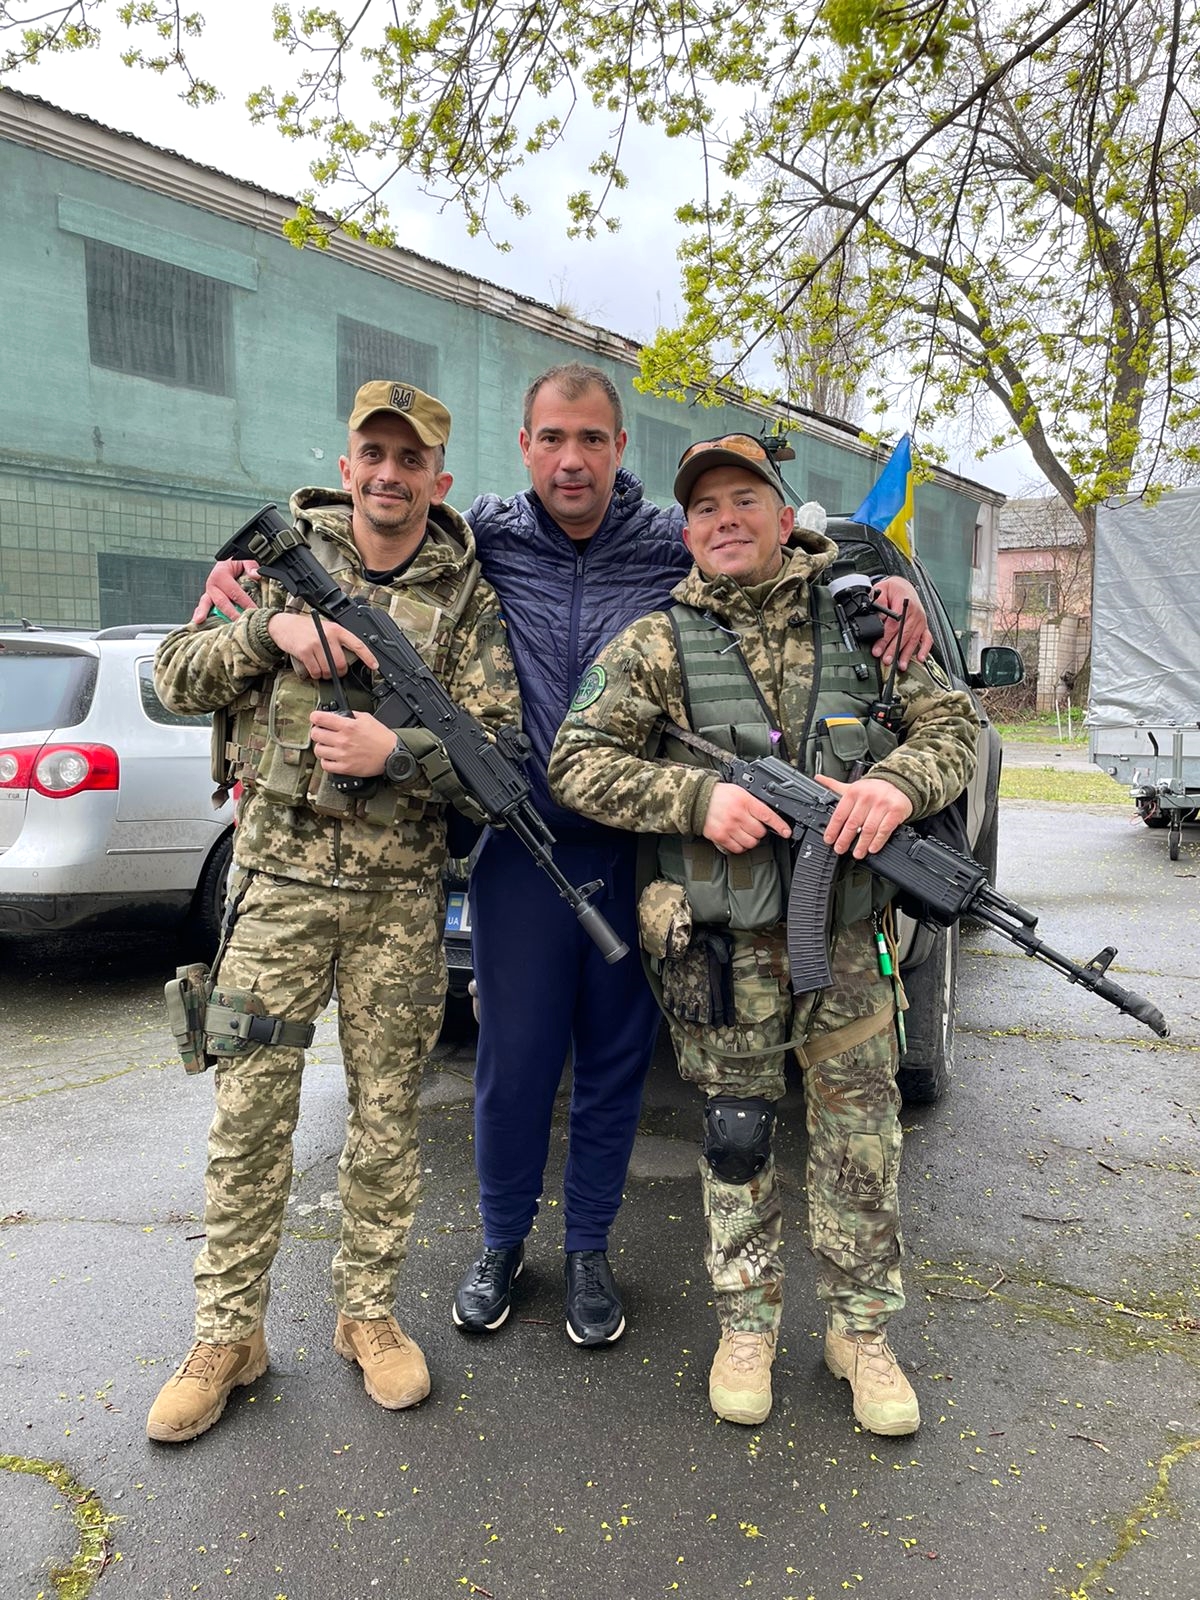 Soldiers posing for a photo in Ukraine